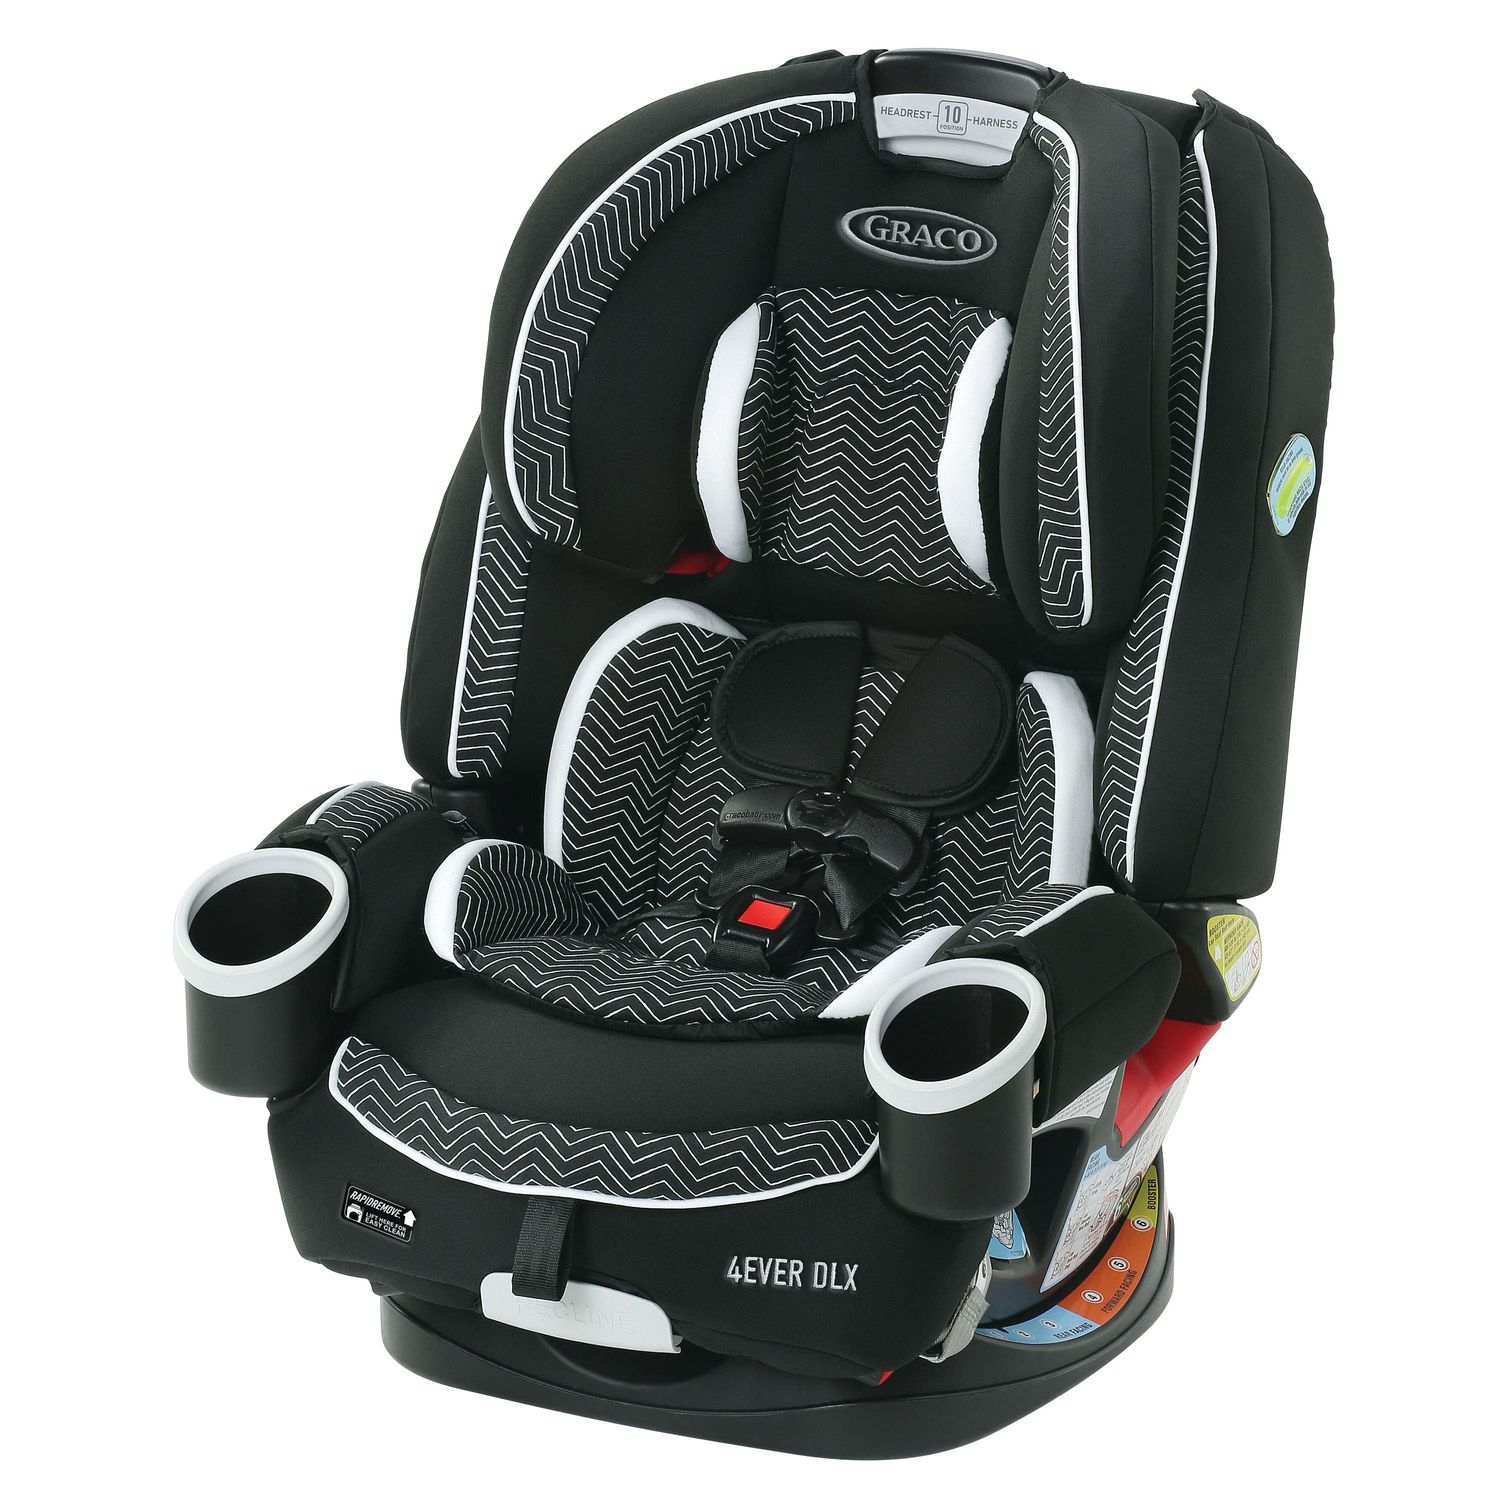 car seat stores near me